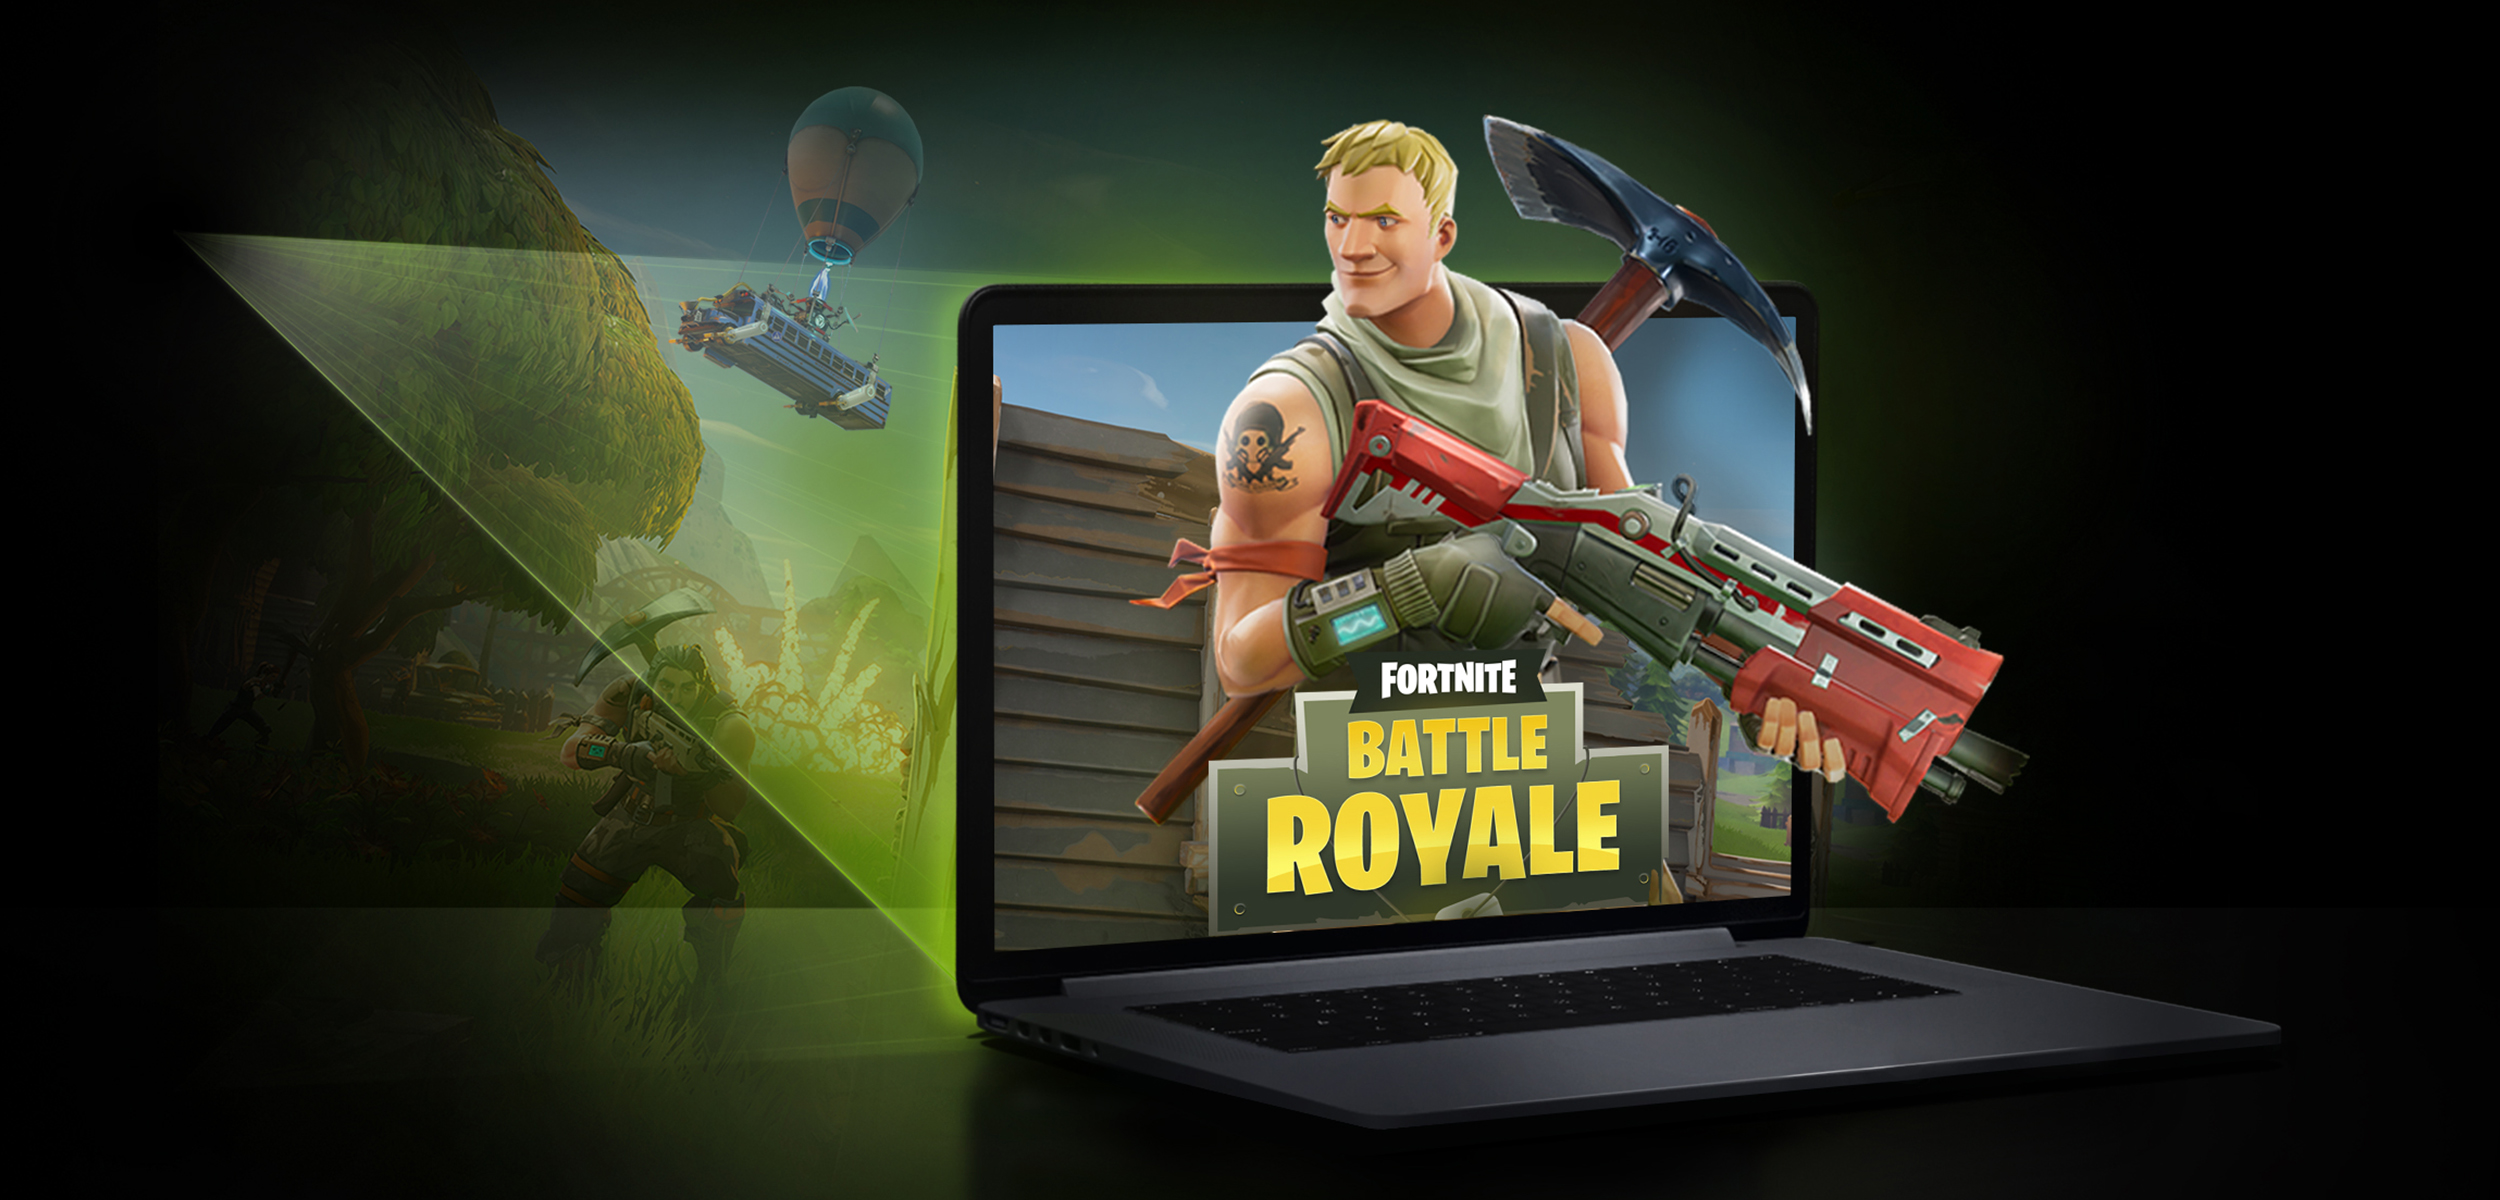 Geforce Now Cloud Gaming Pc Beta Begins - roblox max graphics